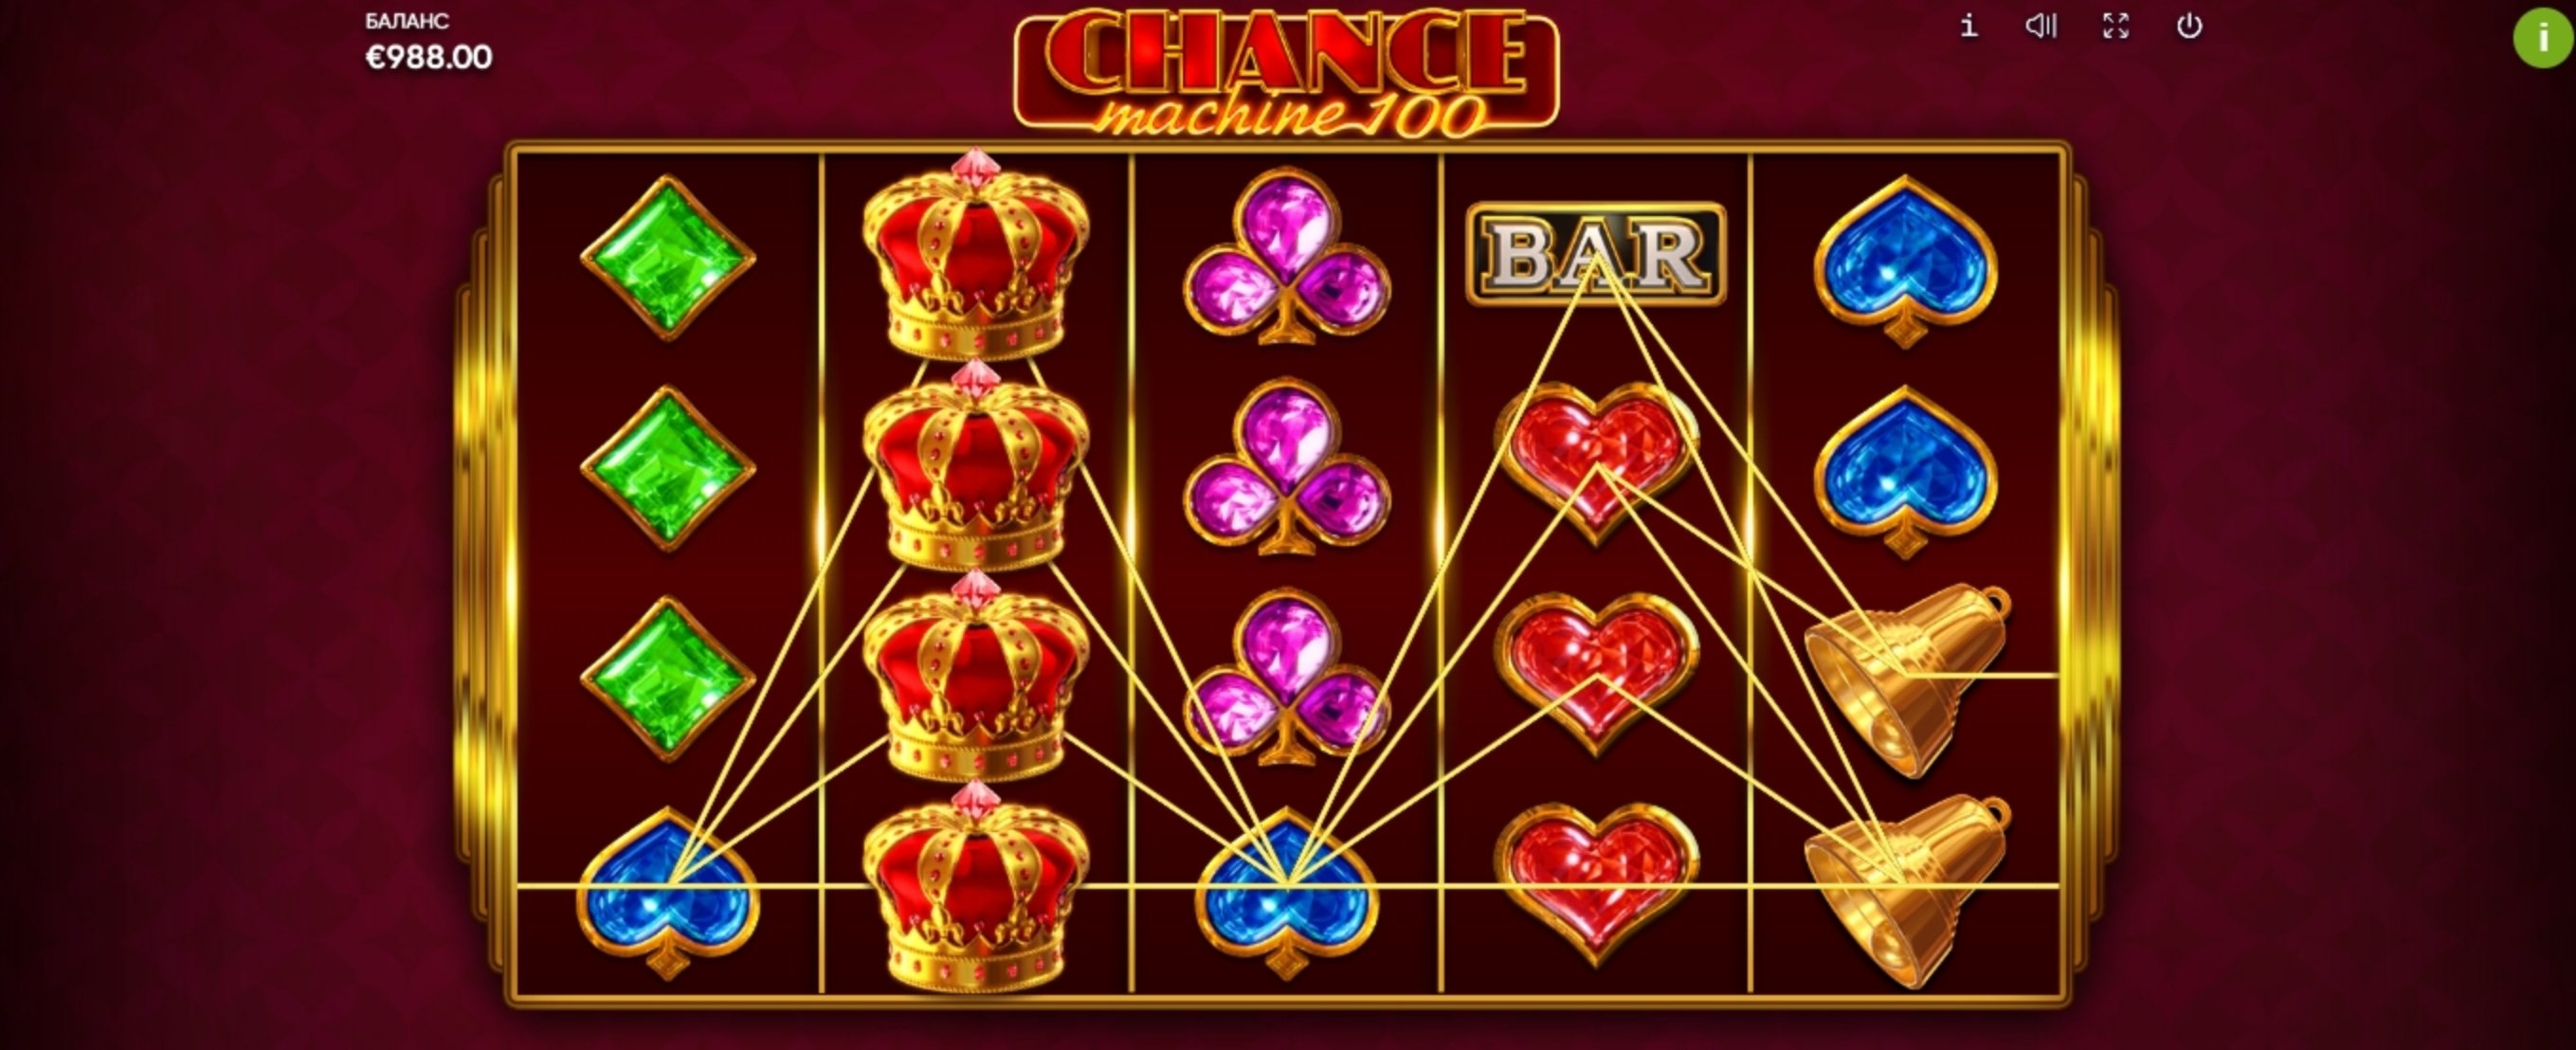 Win Money in Chance Machine 100 Free Slot Game by Endorphina